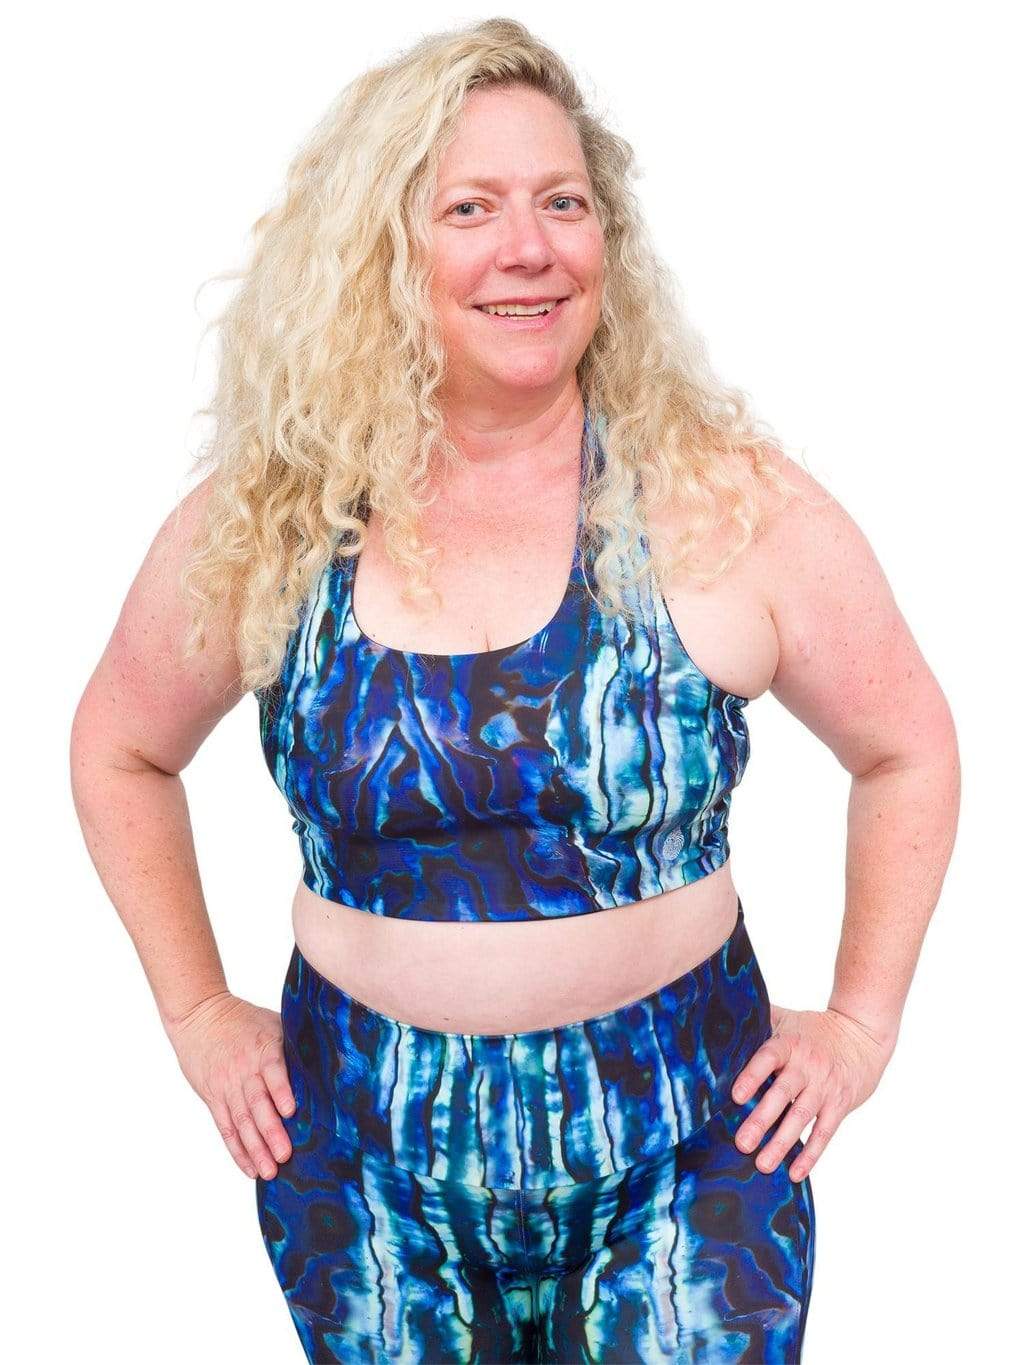 Model: Ruth volunteers for citizen science projects on both salt and freshwater fish and spends as much time as possible in, on, or under the water. She is 5'7", 217 lbs, 40DD and is wearing a 2XL top and legging.